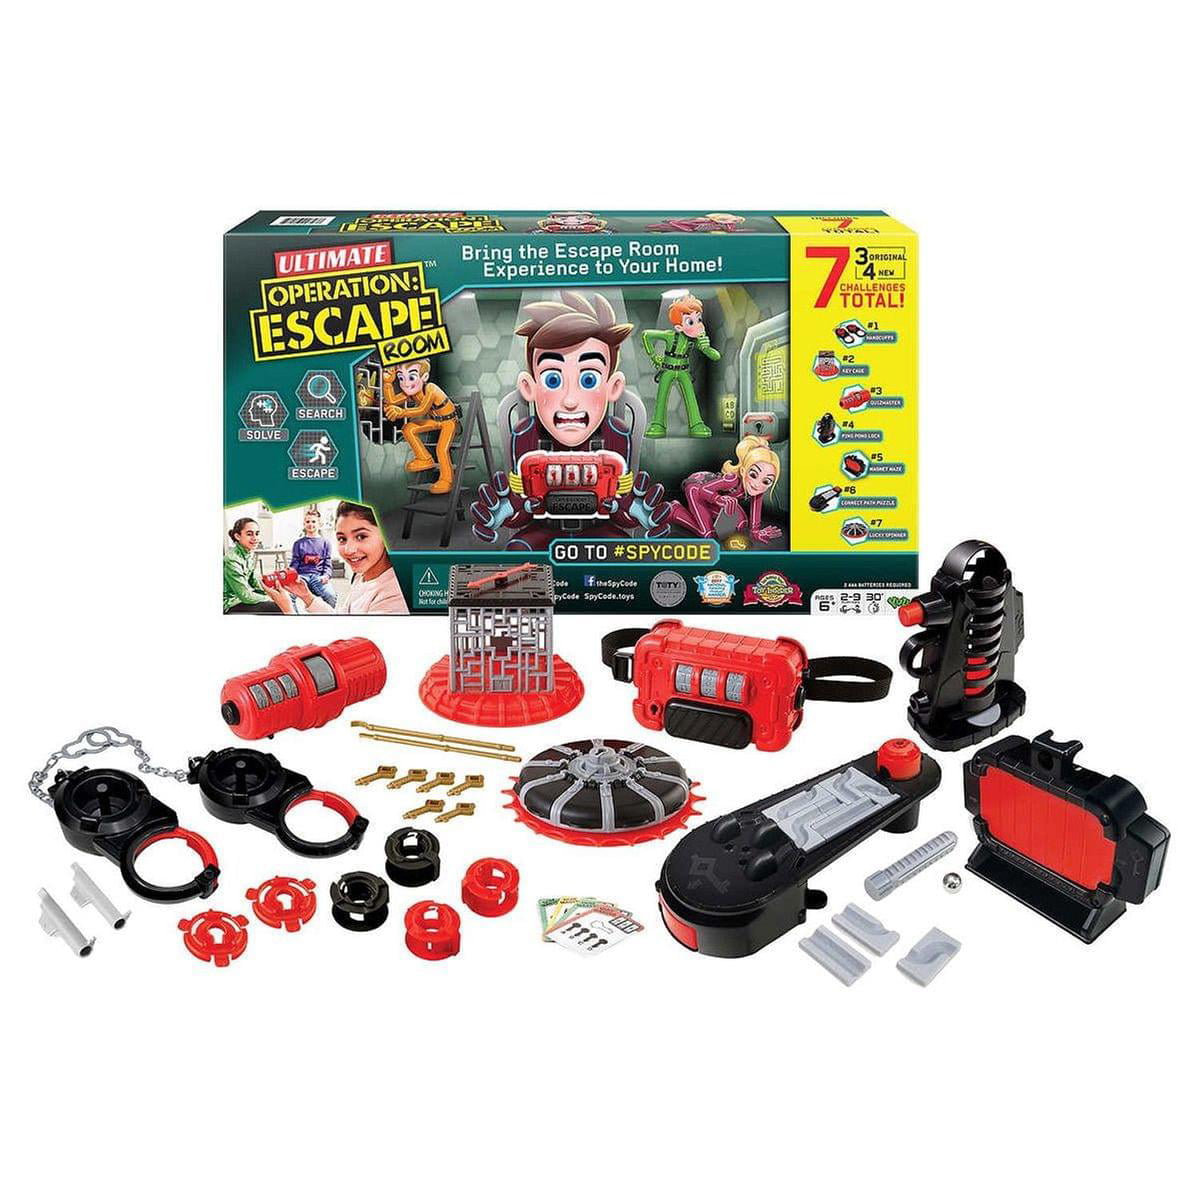 Spy Code Operation Escape Room Yulu Games for sale online